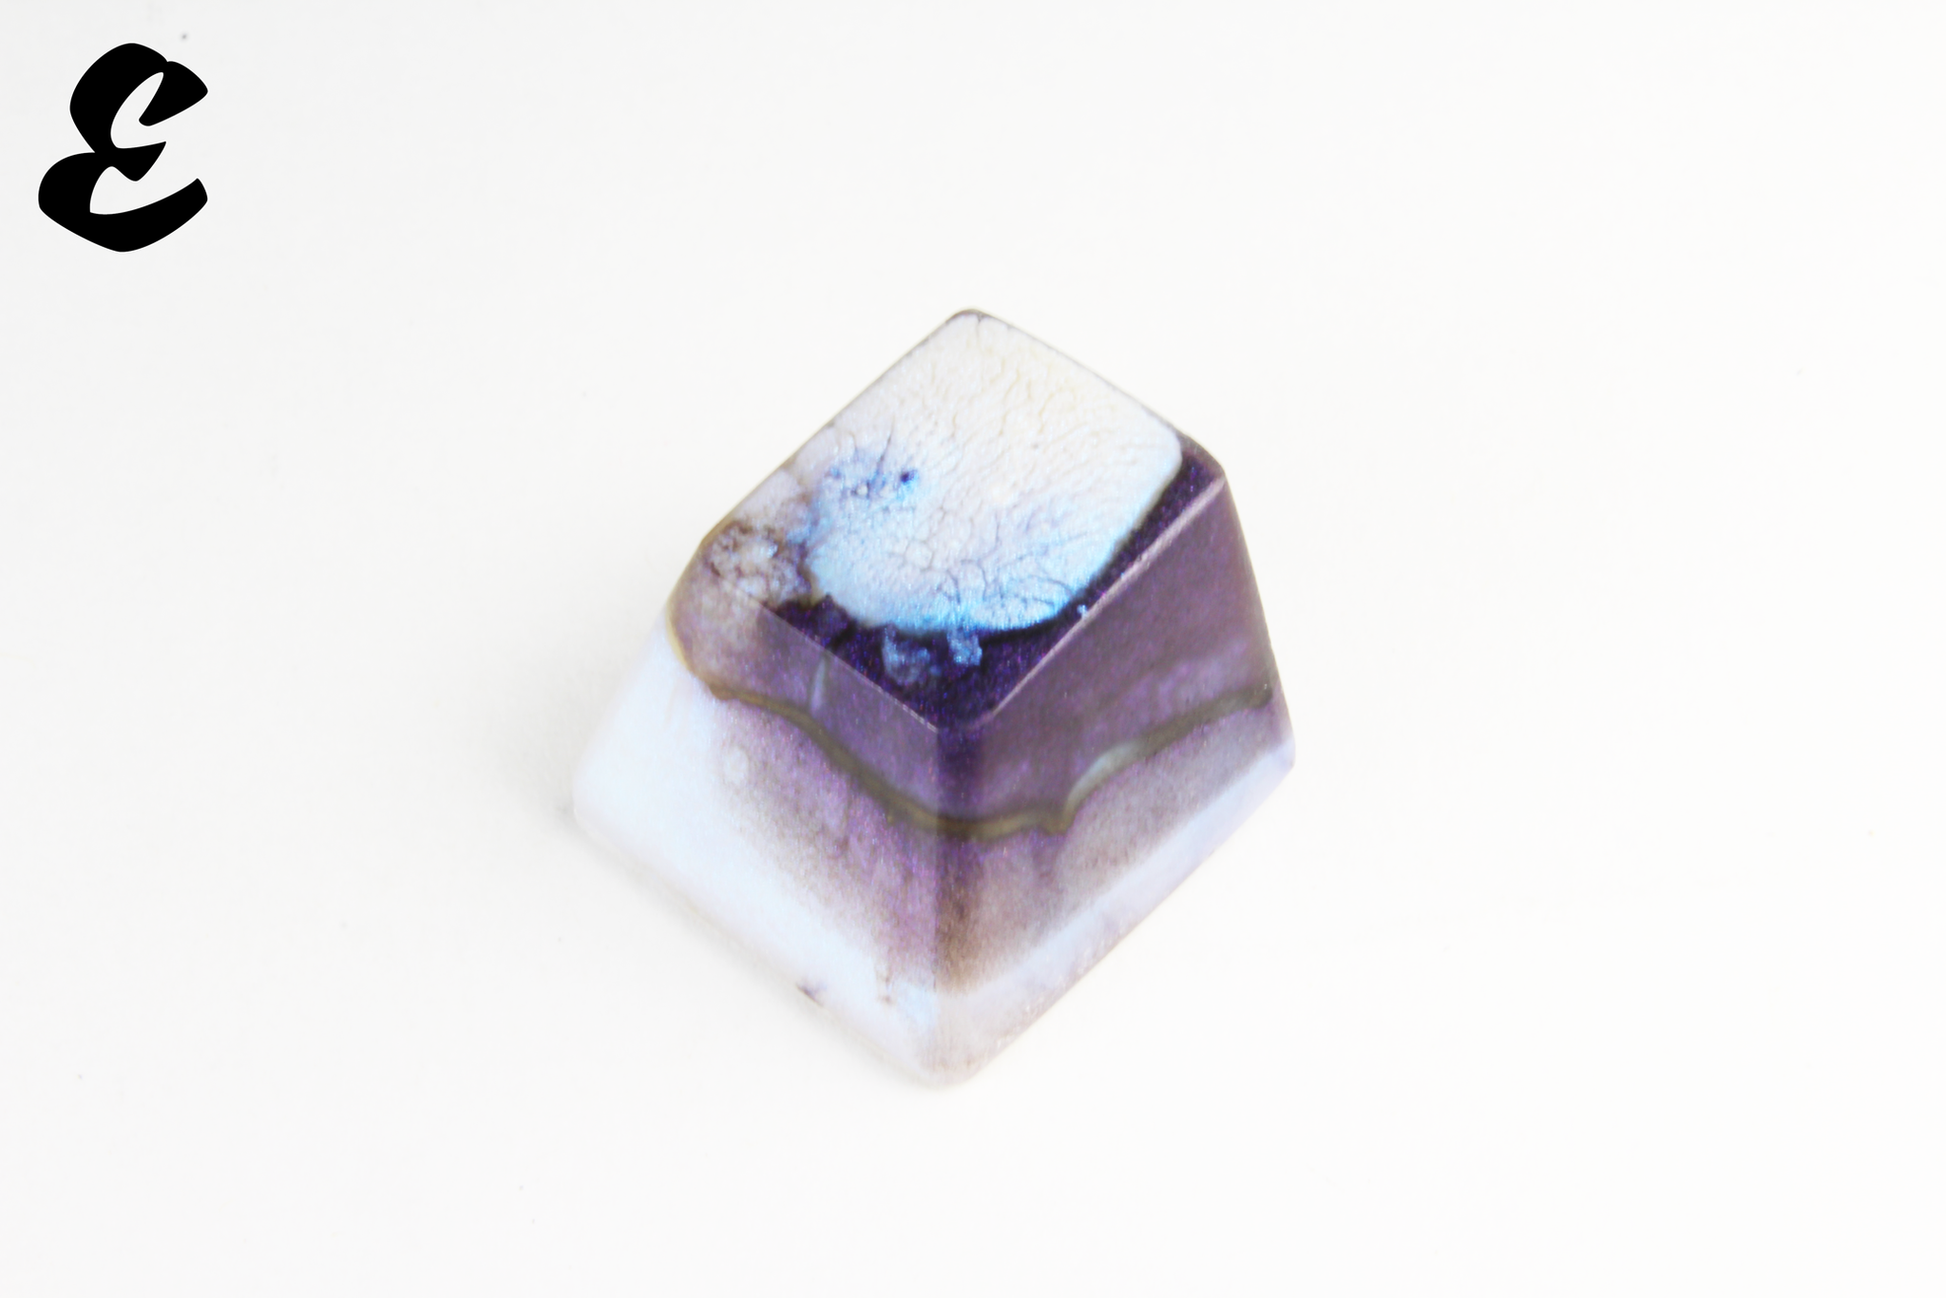 Chaos Caps 1.1 - Violet Moonlight - PrimeCaps Keycap - Blank and Sculpted Artisan Keycaps for cherry MX mechanical keyboards 